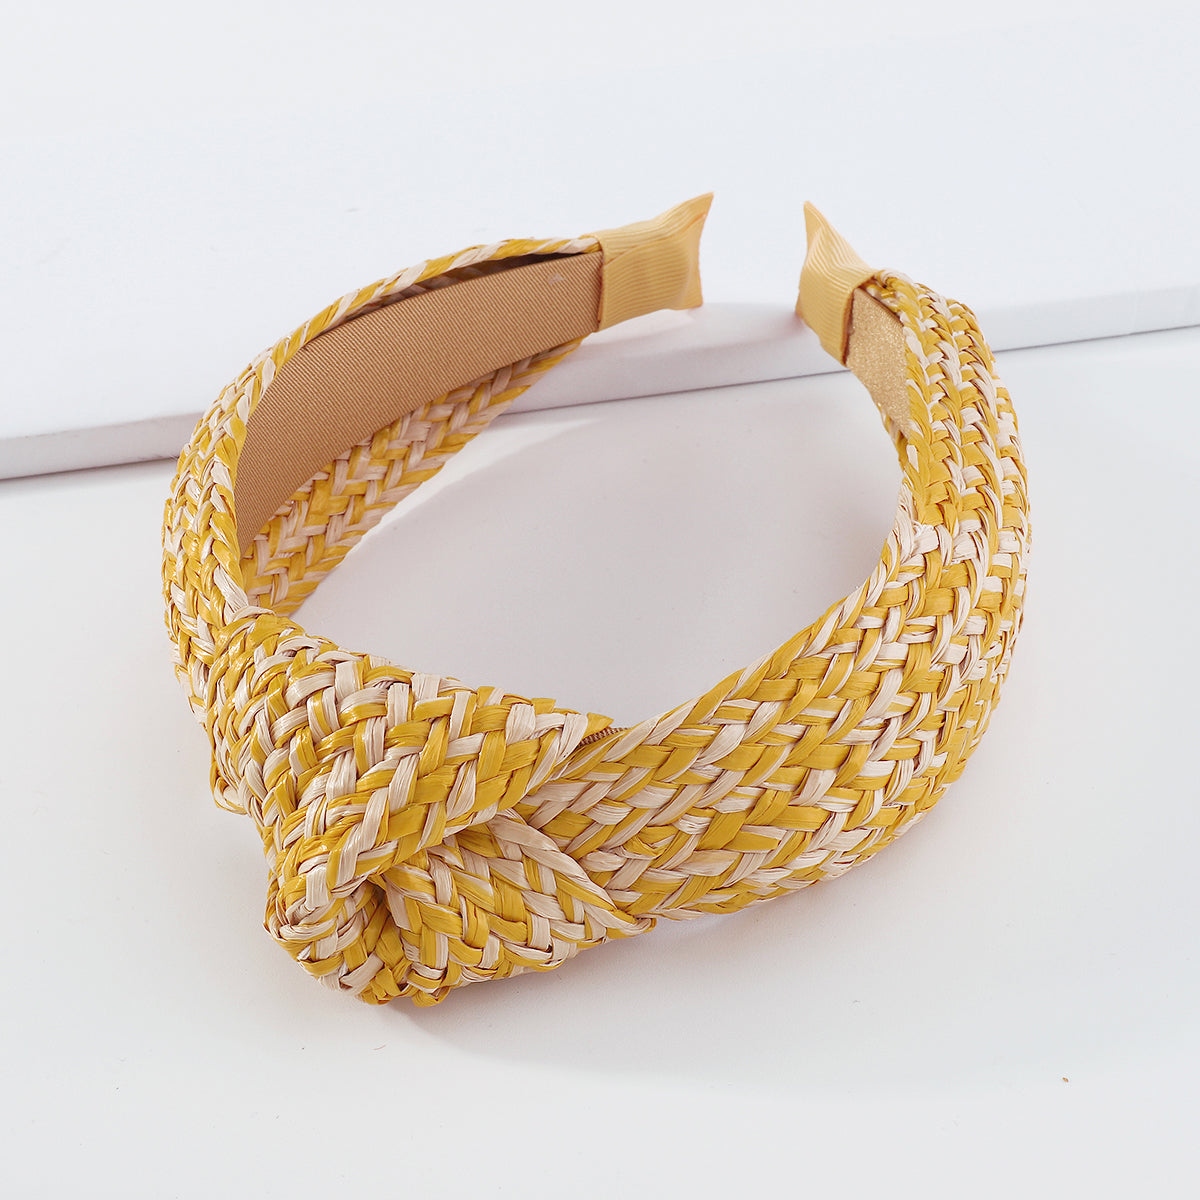 Summer Straw Weaving Top Knotted Headband medyjewelry